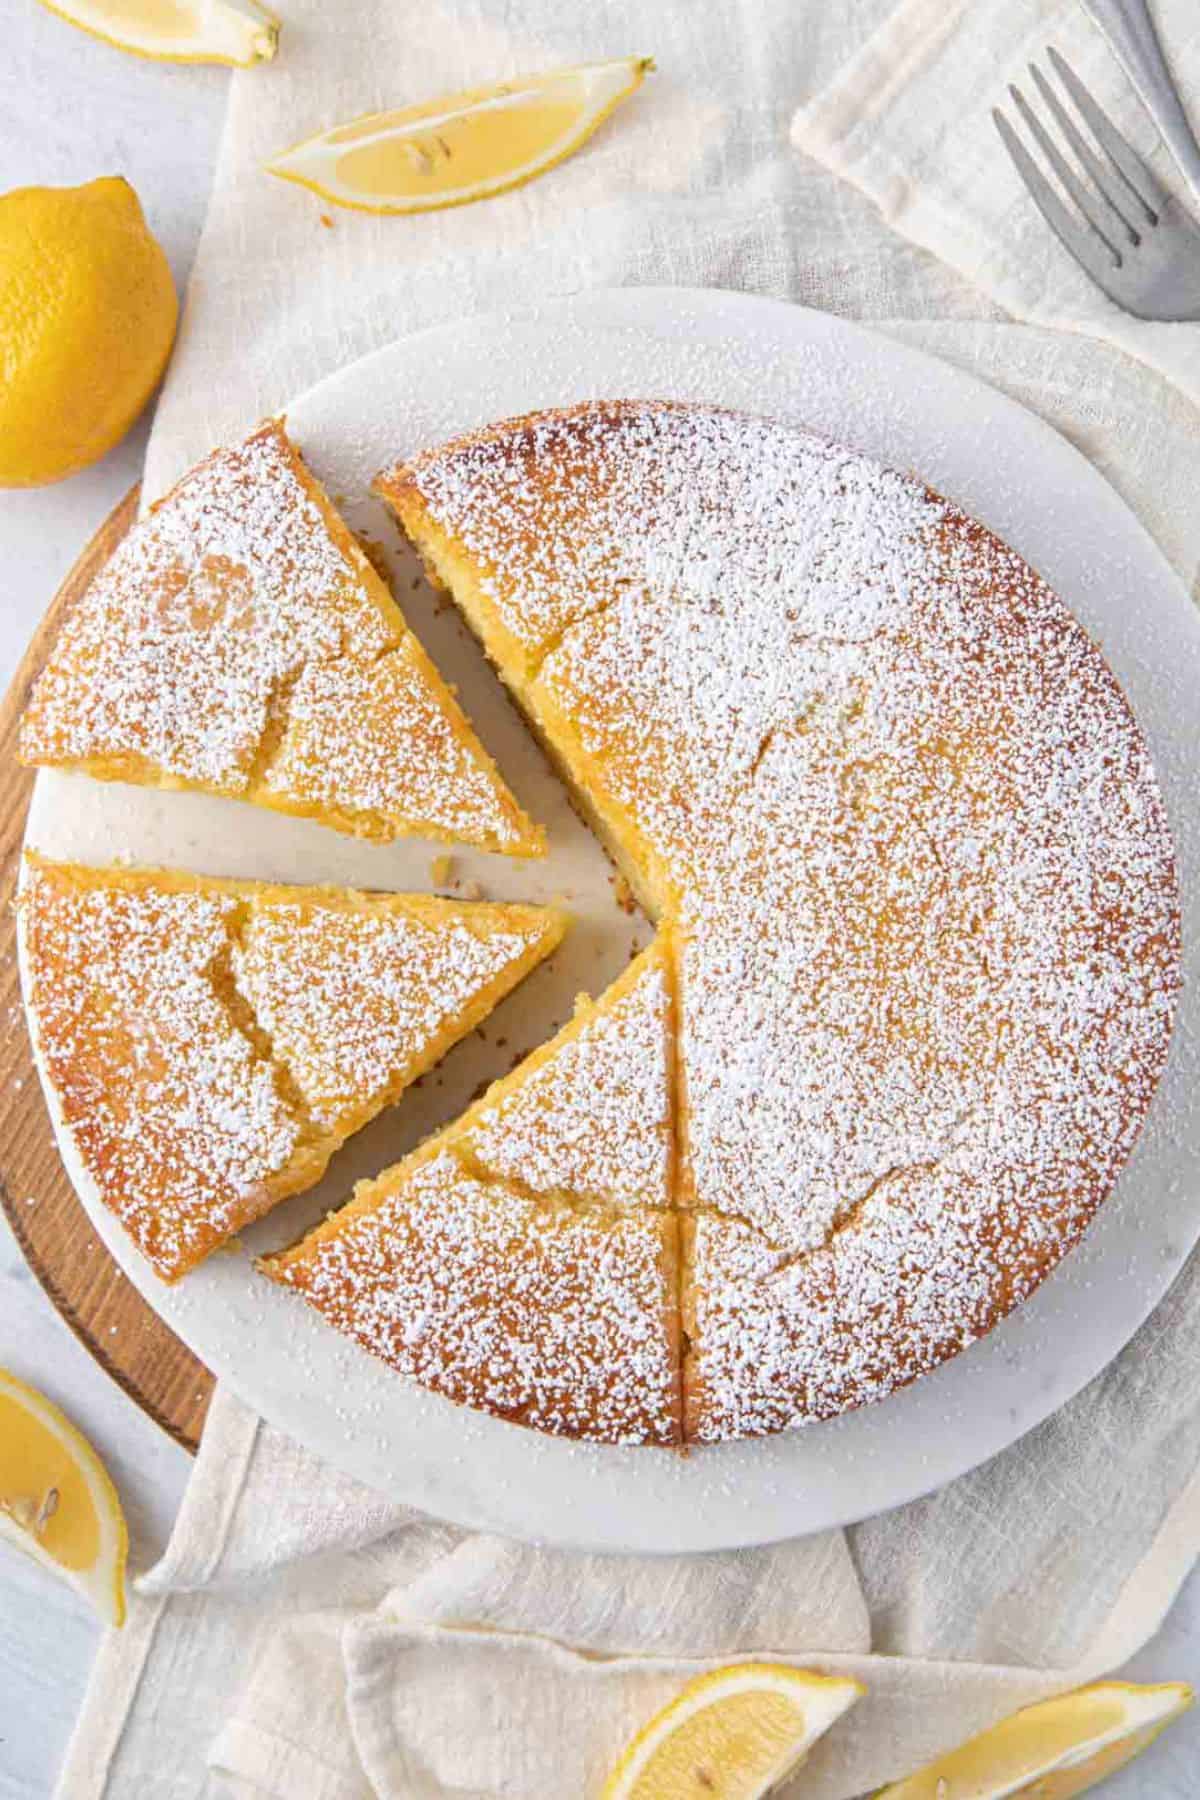 Whole lemon cake sprinkled with powdered sugar with three slices cut from one side, two slices are pulled away slightly and the third is still attached to the cake. Cake plate is sitting on a round wooden board with a towel over it, with lemon wedges around.